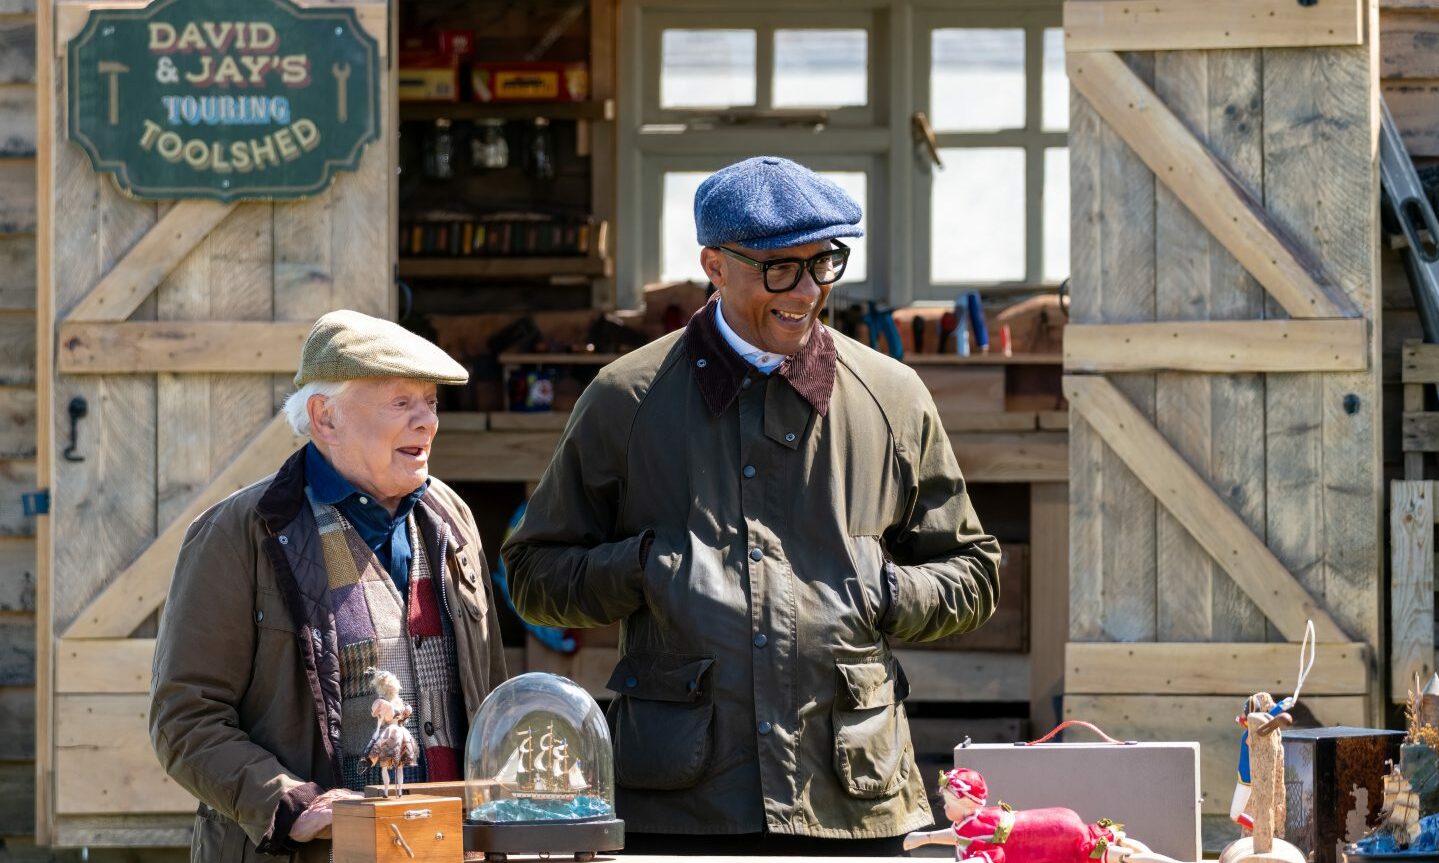 Sir David Jason and Jay Blades in Cullen for BBC TV series